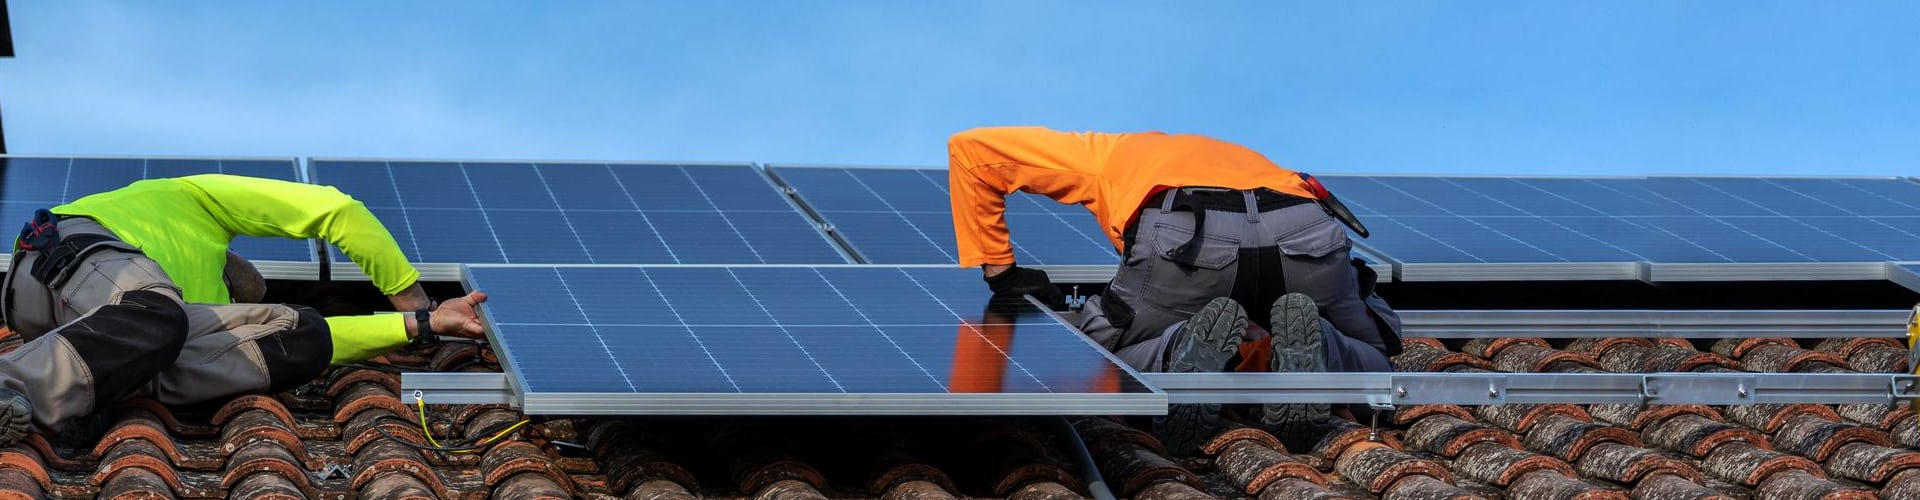 Finding the Right Solar Panel Installers in Sydney: Tips and Recommendations